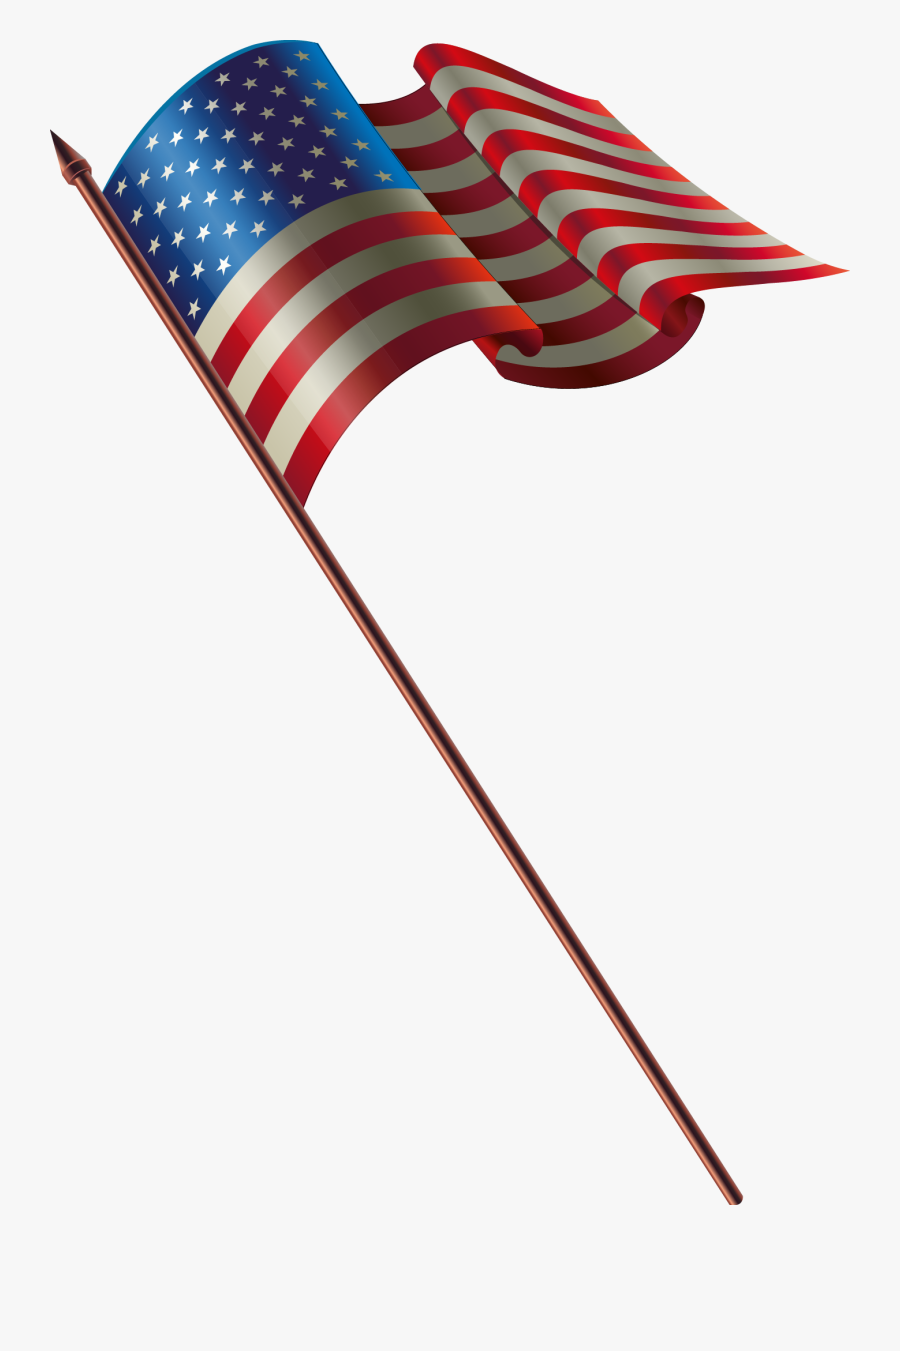 America Clipart American Freedom - Flag Of The United States, Transparent Clipart